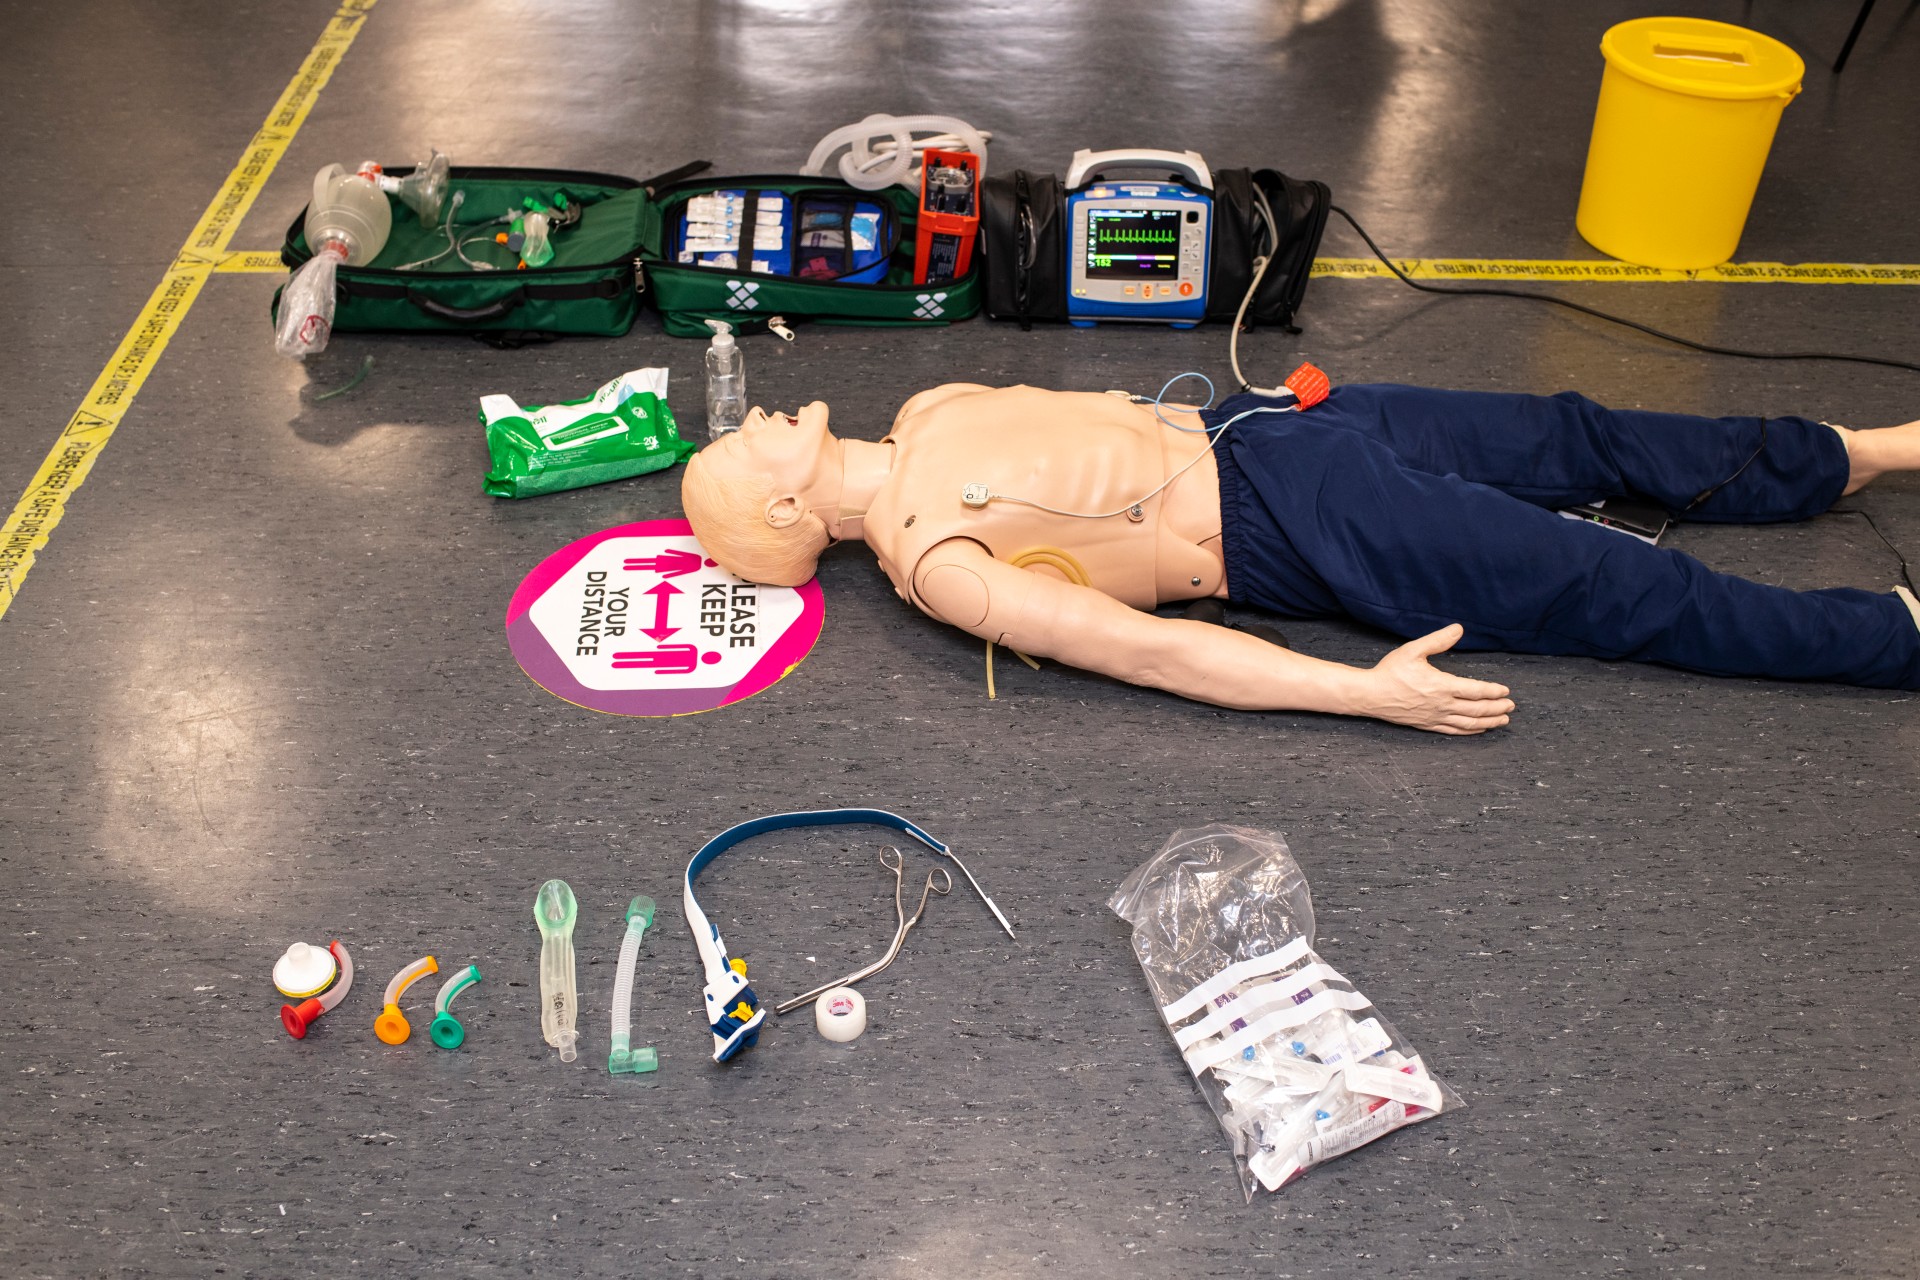 Manikin with a paramedic bag and breathing support equipment laid out beside it.